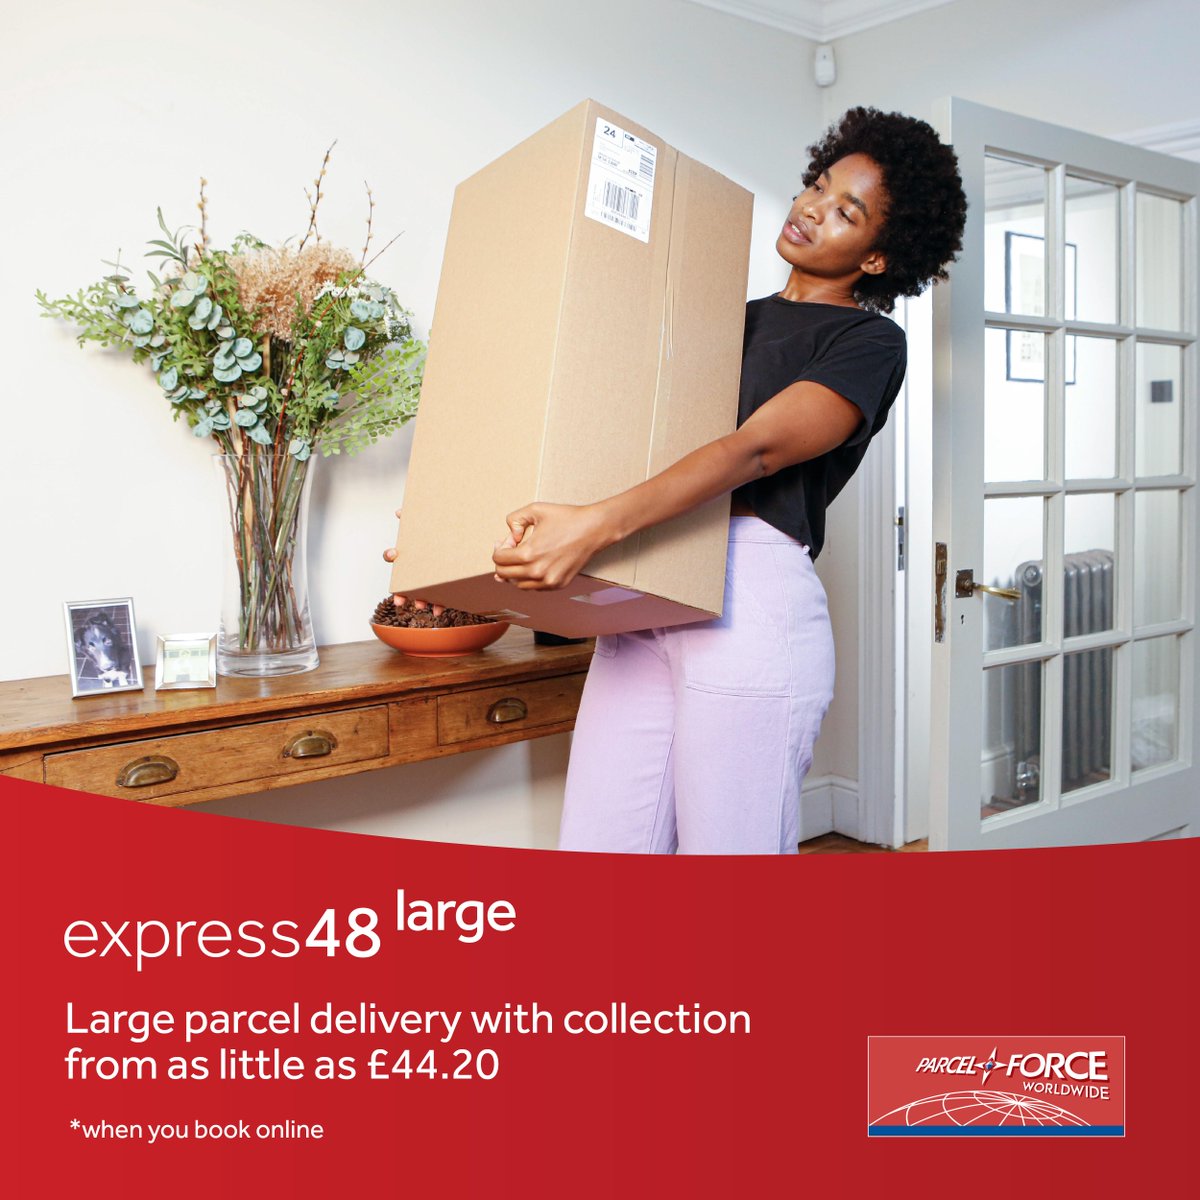 Large parcel delivery from £44.20 with collection when you book online. Prices effective 02.04.24. Book and send online: ms.spr.ly/6015cAnJf